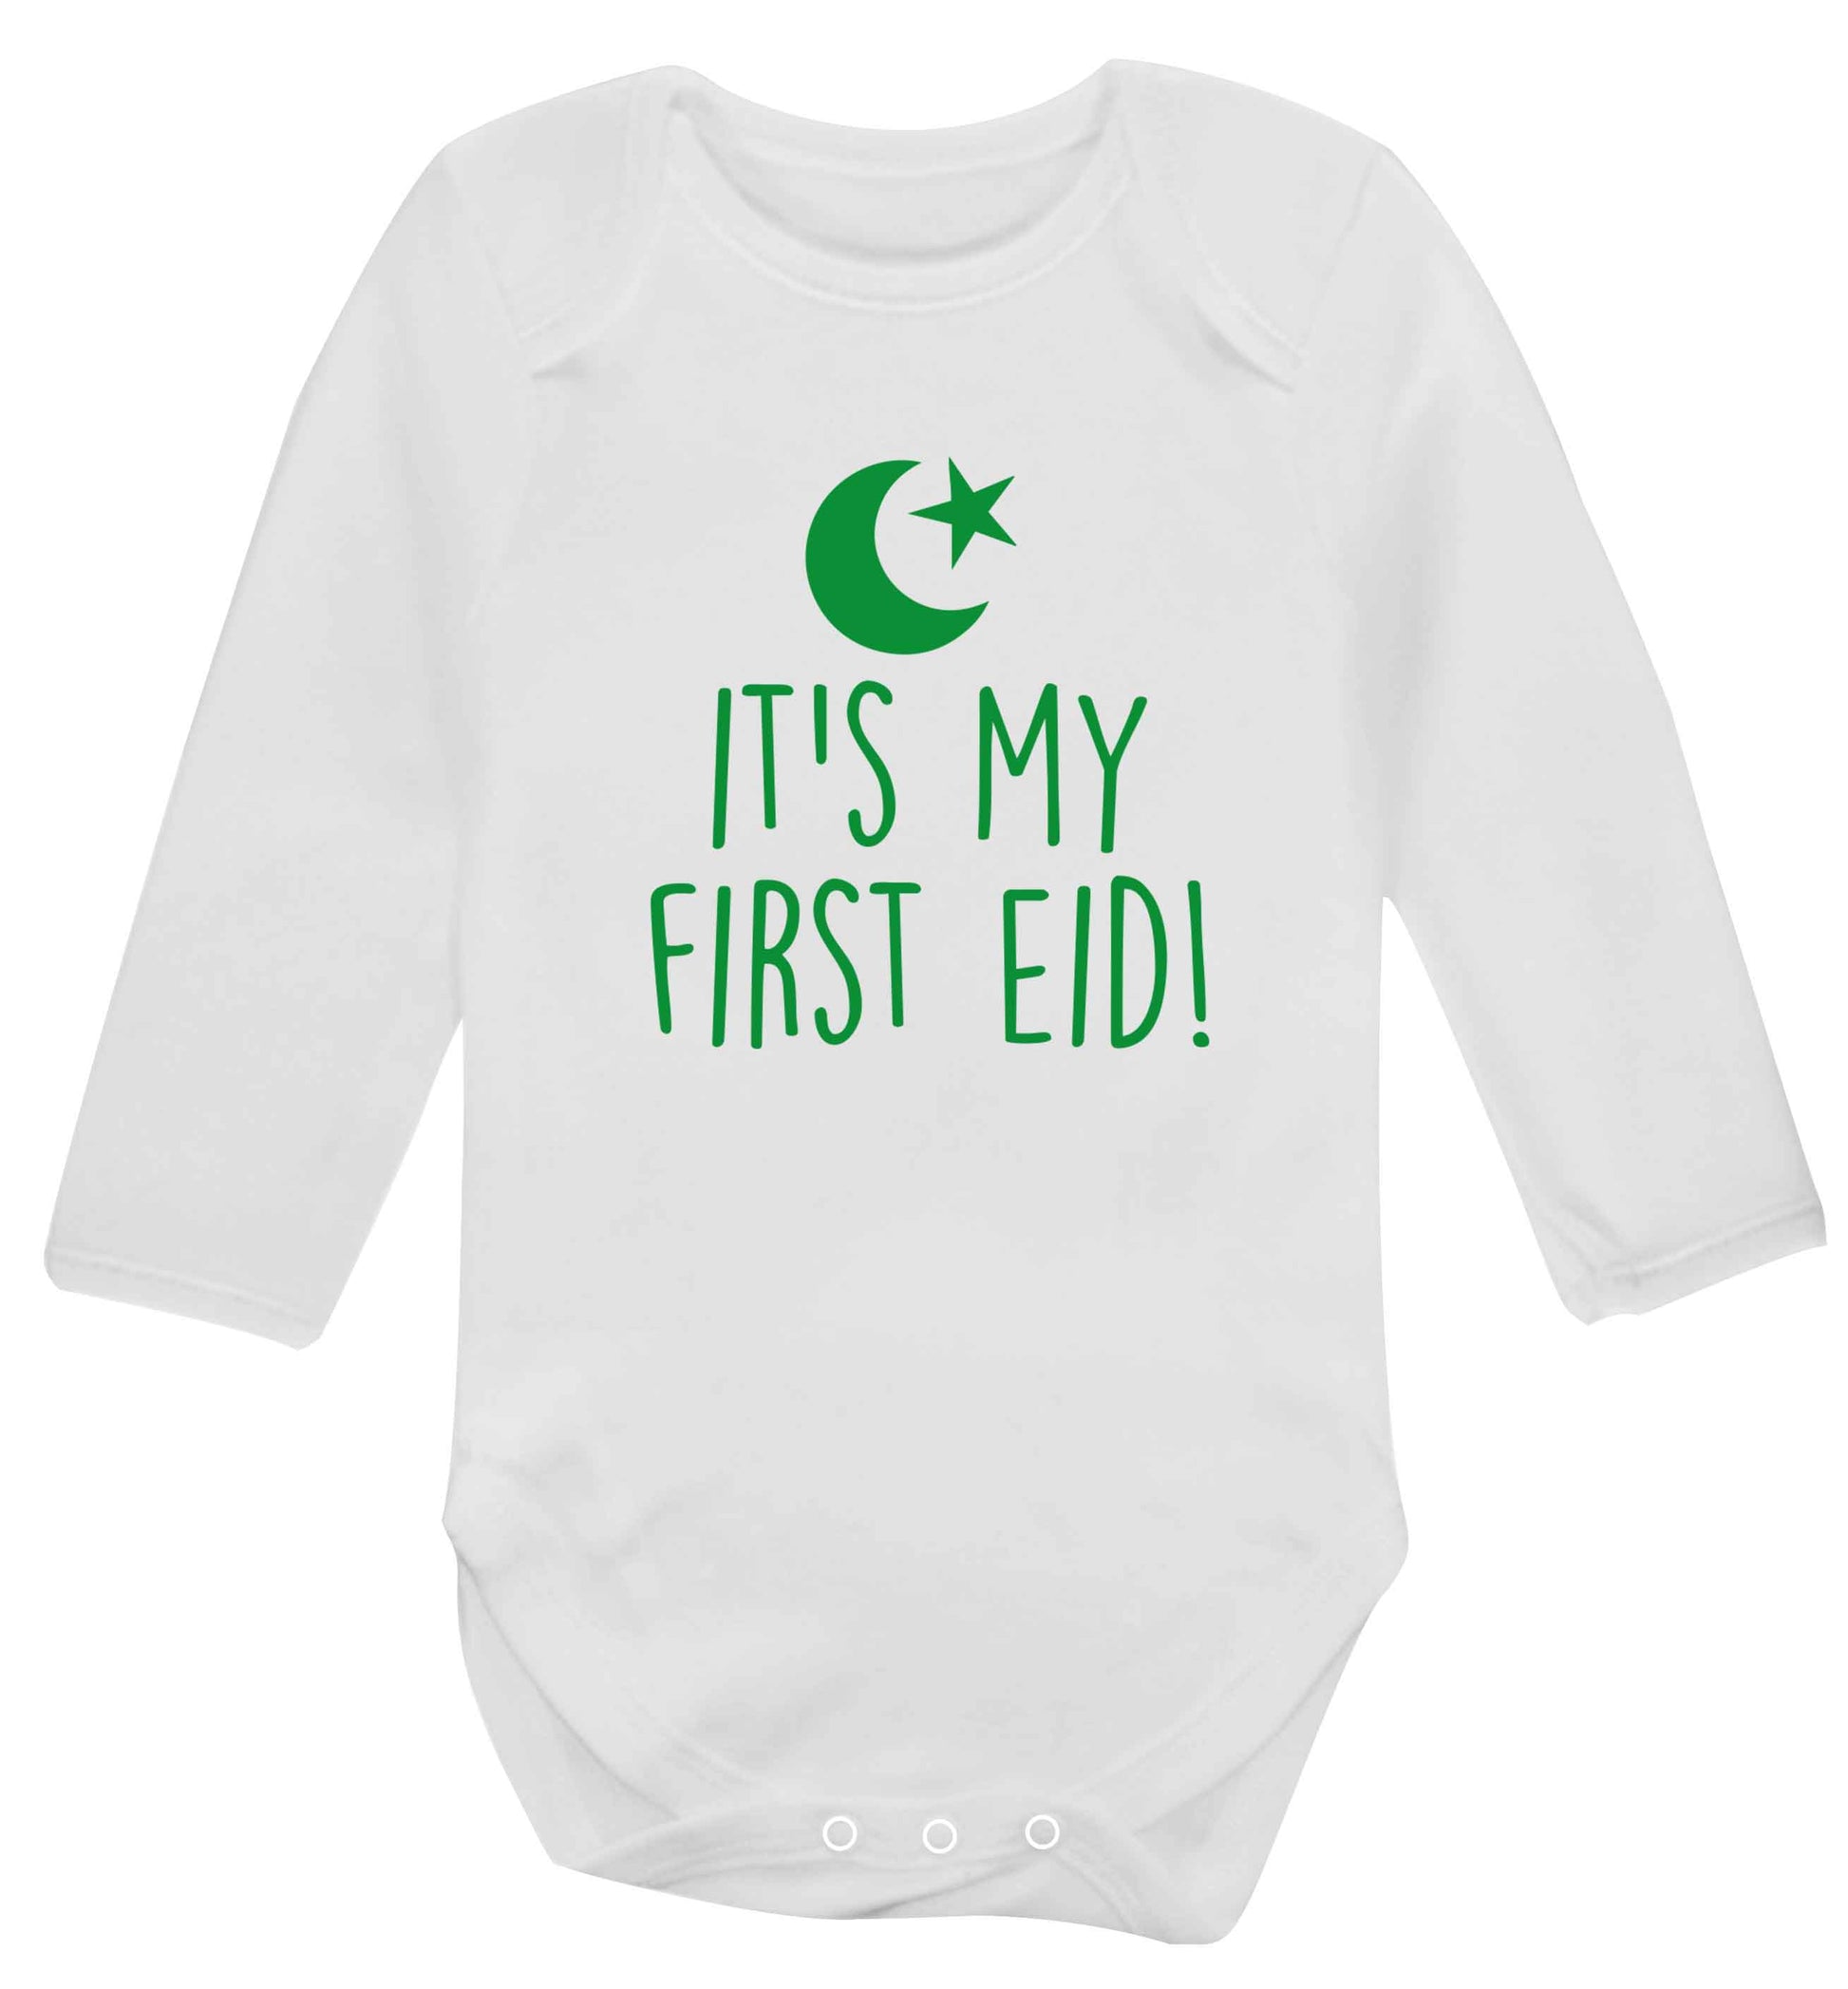 It's my first Eid baby vest long sleeved white 6-12 months